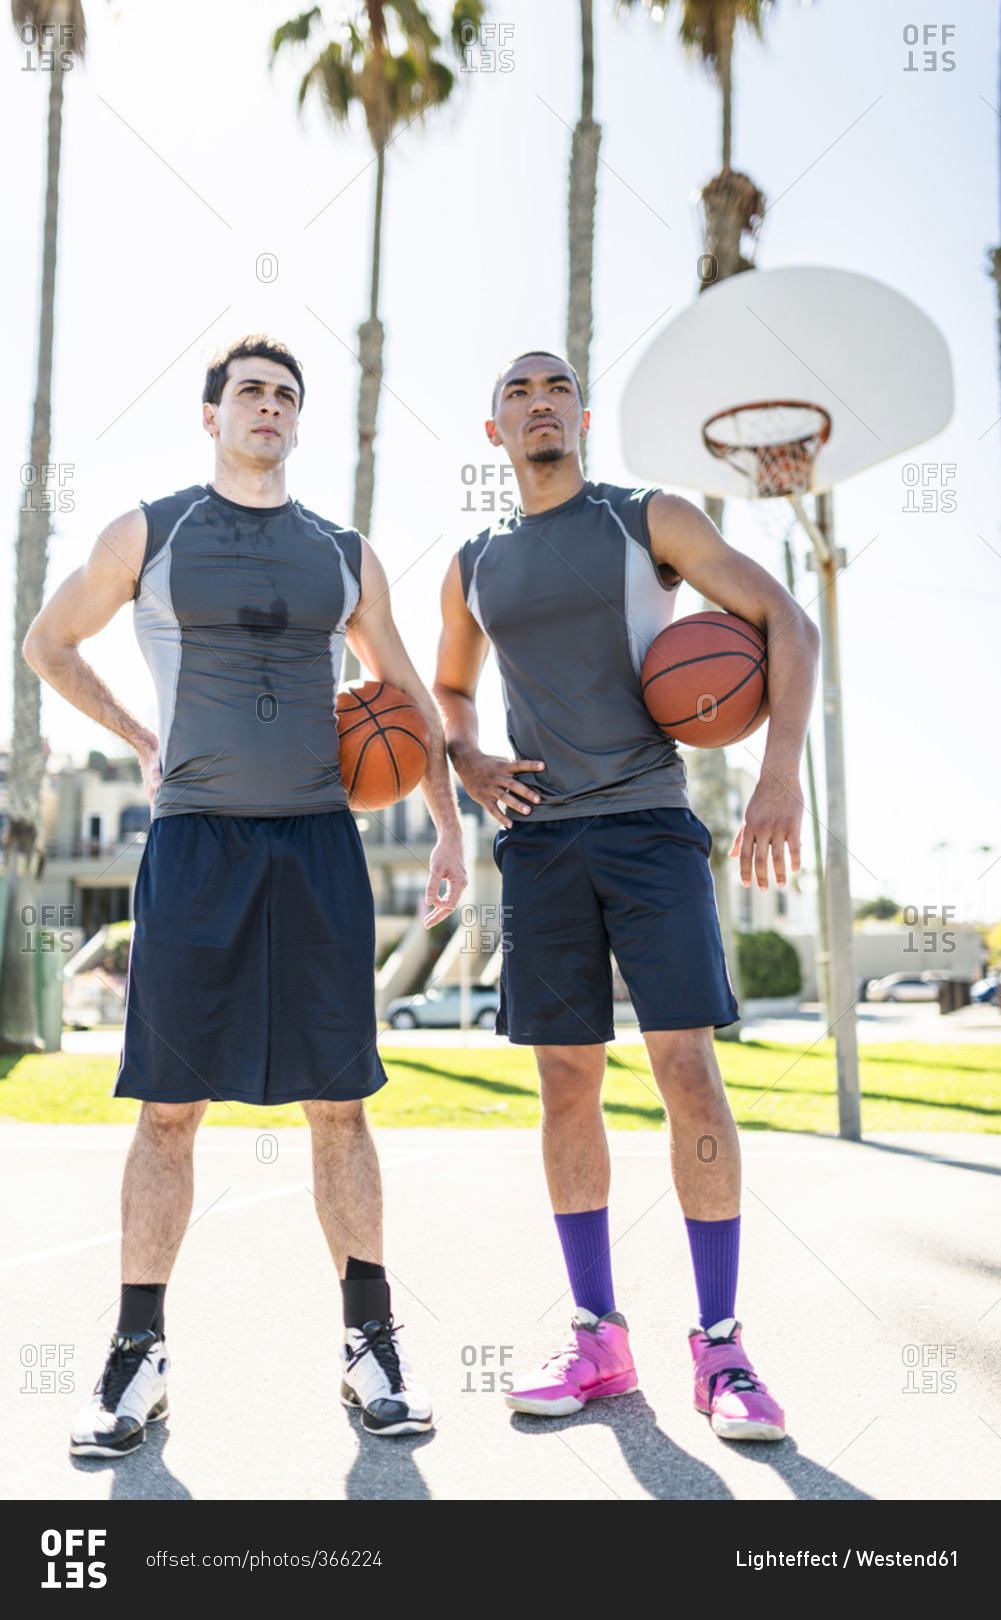 Two young men standing on outdoor basketball court